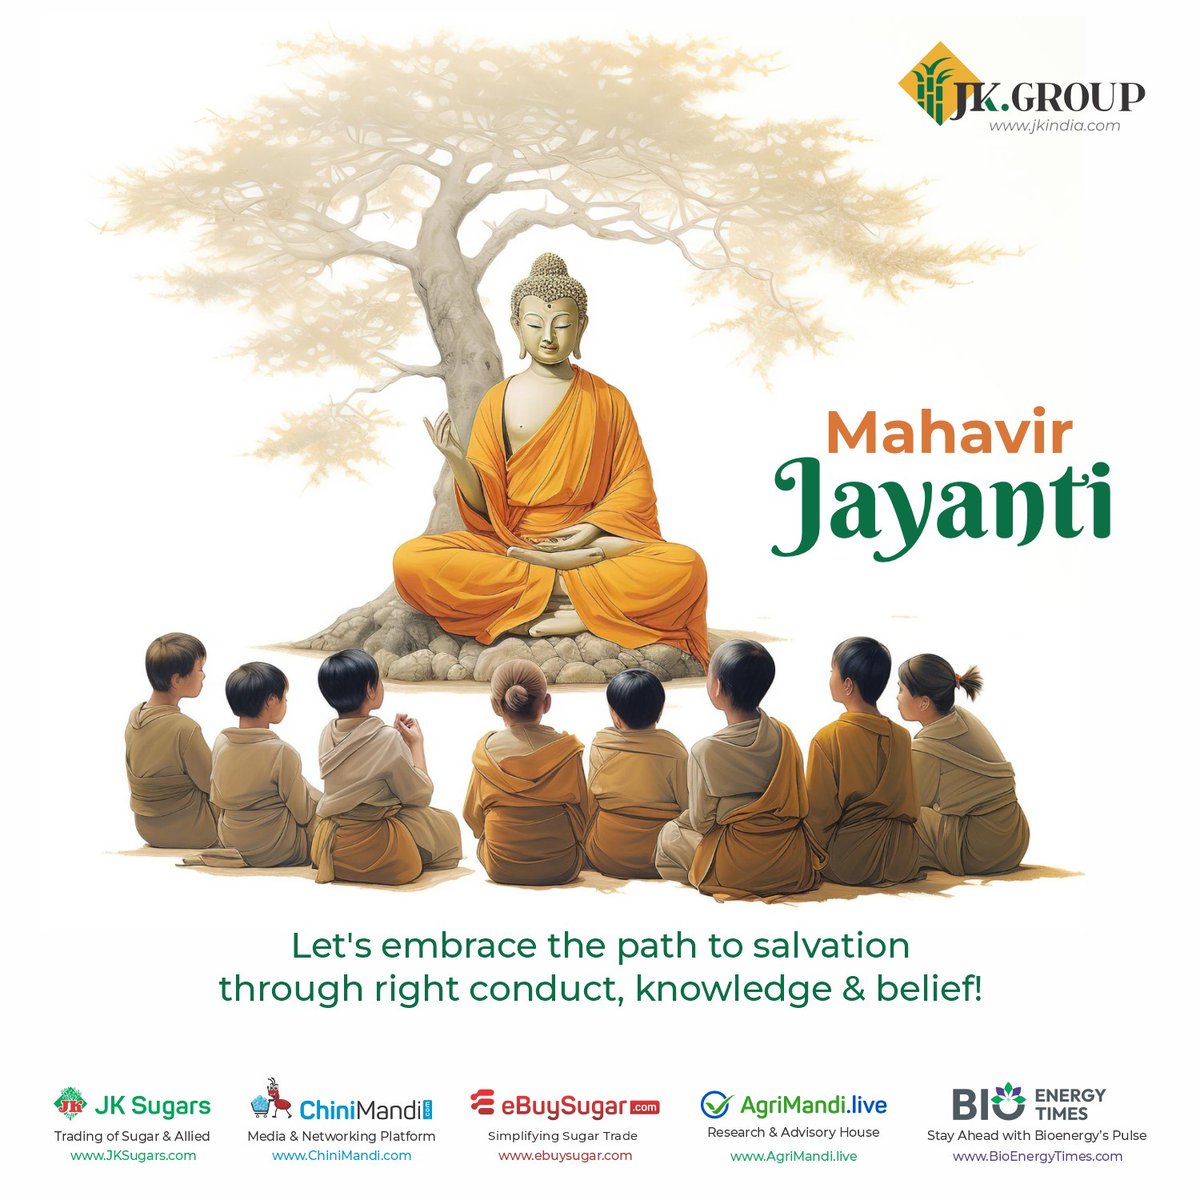 On this auspicious occasion of Mahavir Jayanti, let's celebrate the teachings of Lord Mahavir who showed us the path of truth, non-violence, and compassion. May his teachings inspire us to lead a life of kindness and harmony. Happy Mahavir Jayanti! 🙏 #mahavirjayanti #festival